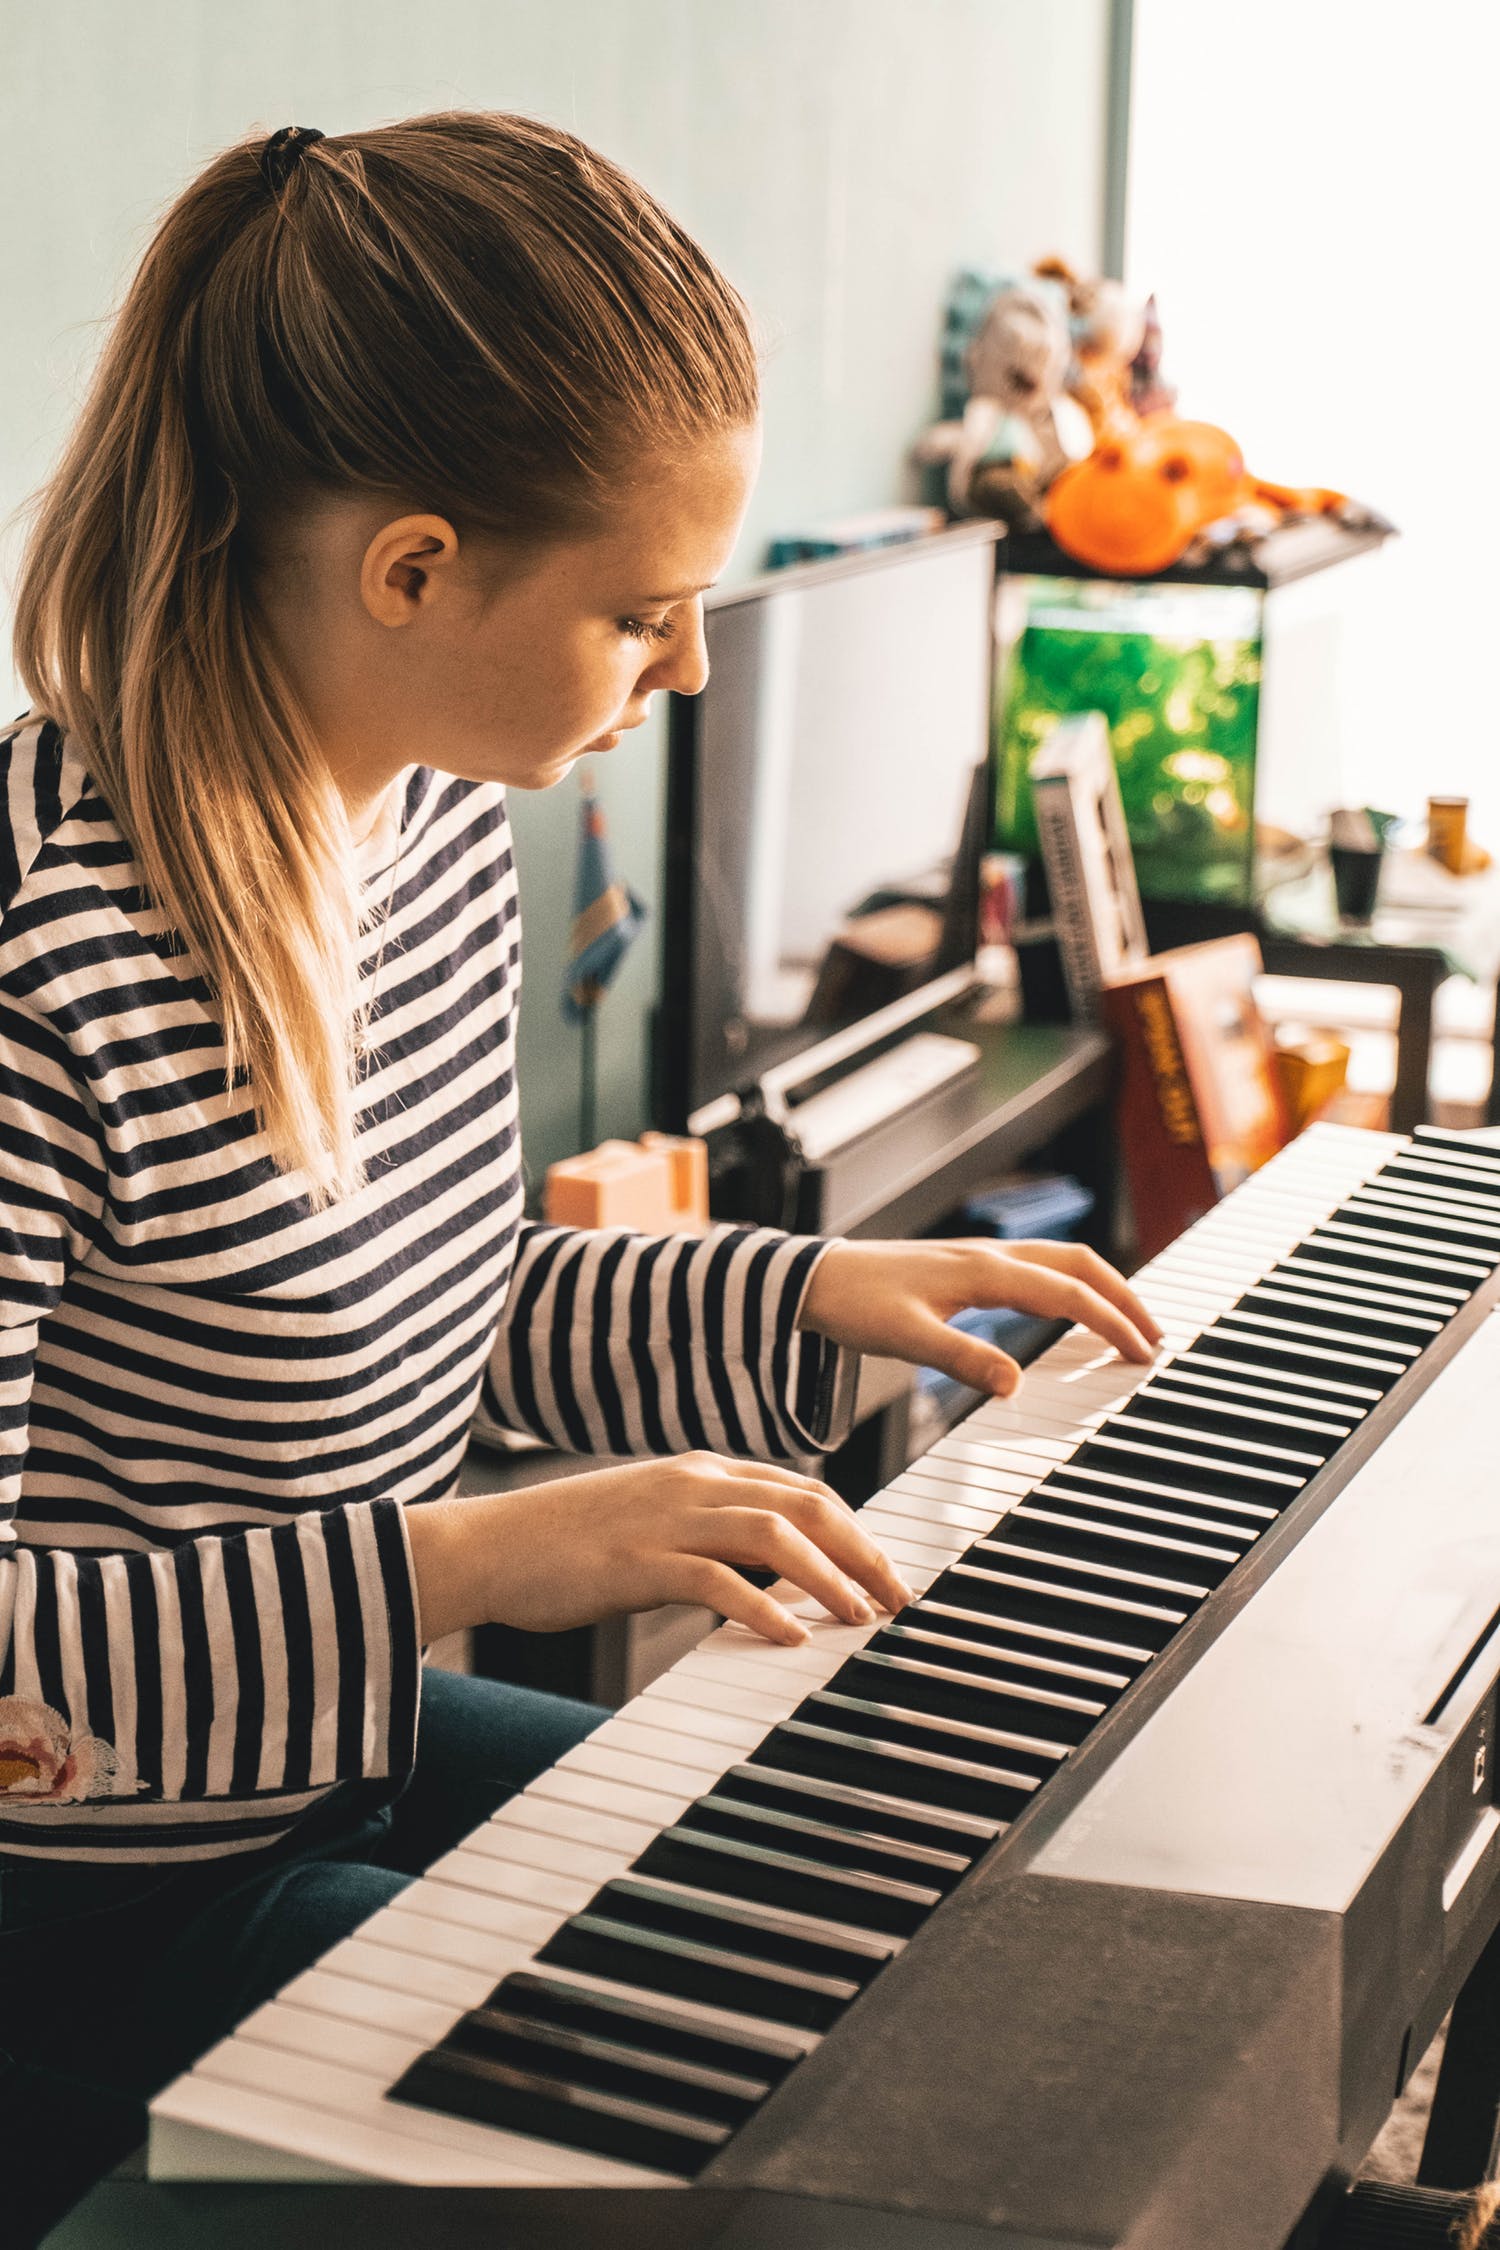 Digital vs acoustic piano, which is better for learning to play?